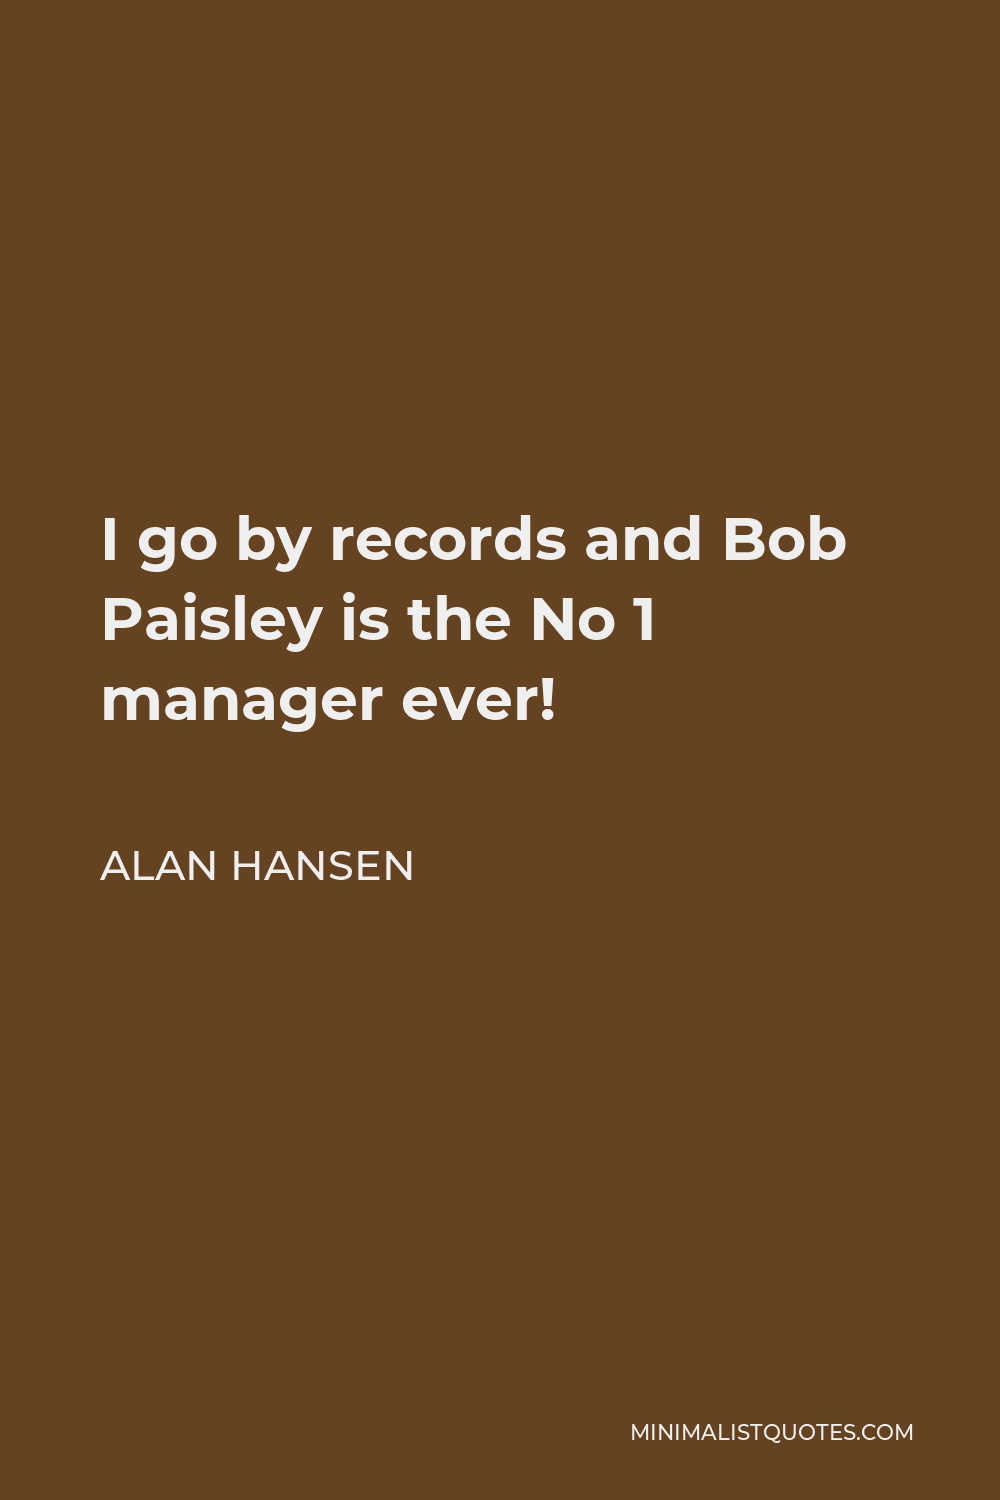 Alan Hansen Quote - I go by records and Bob Paisley is the No 1 manager ever!